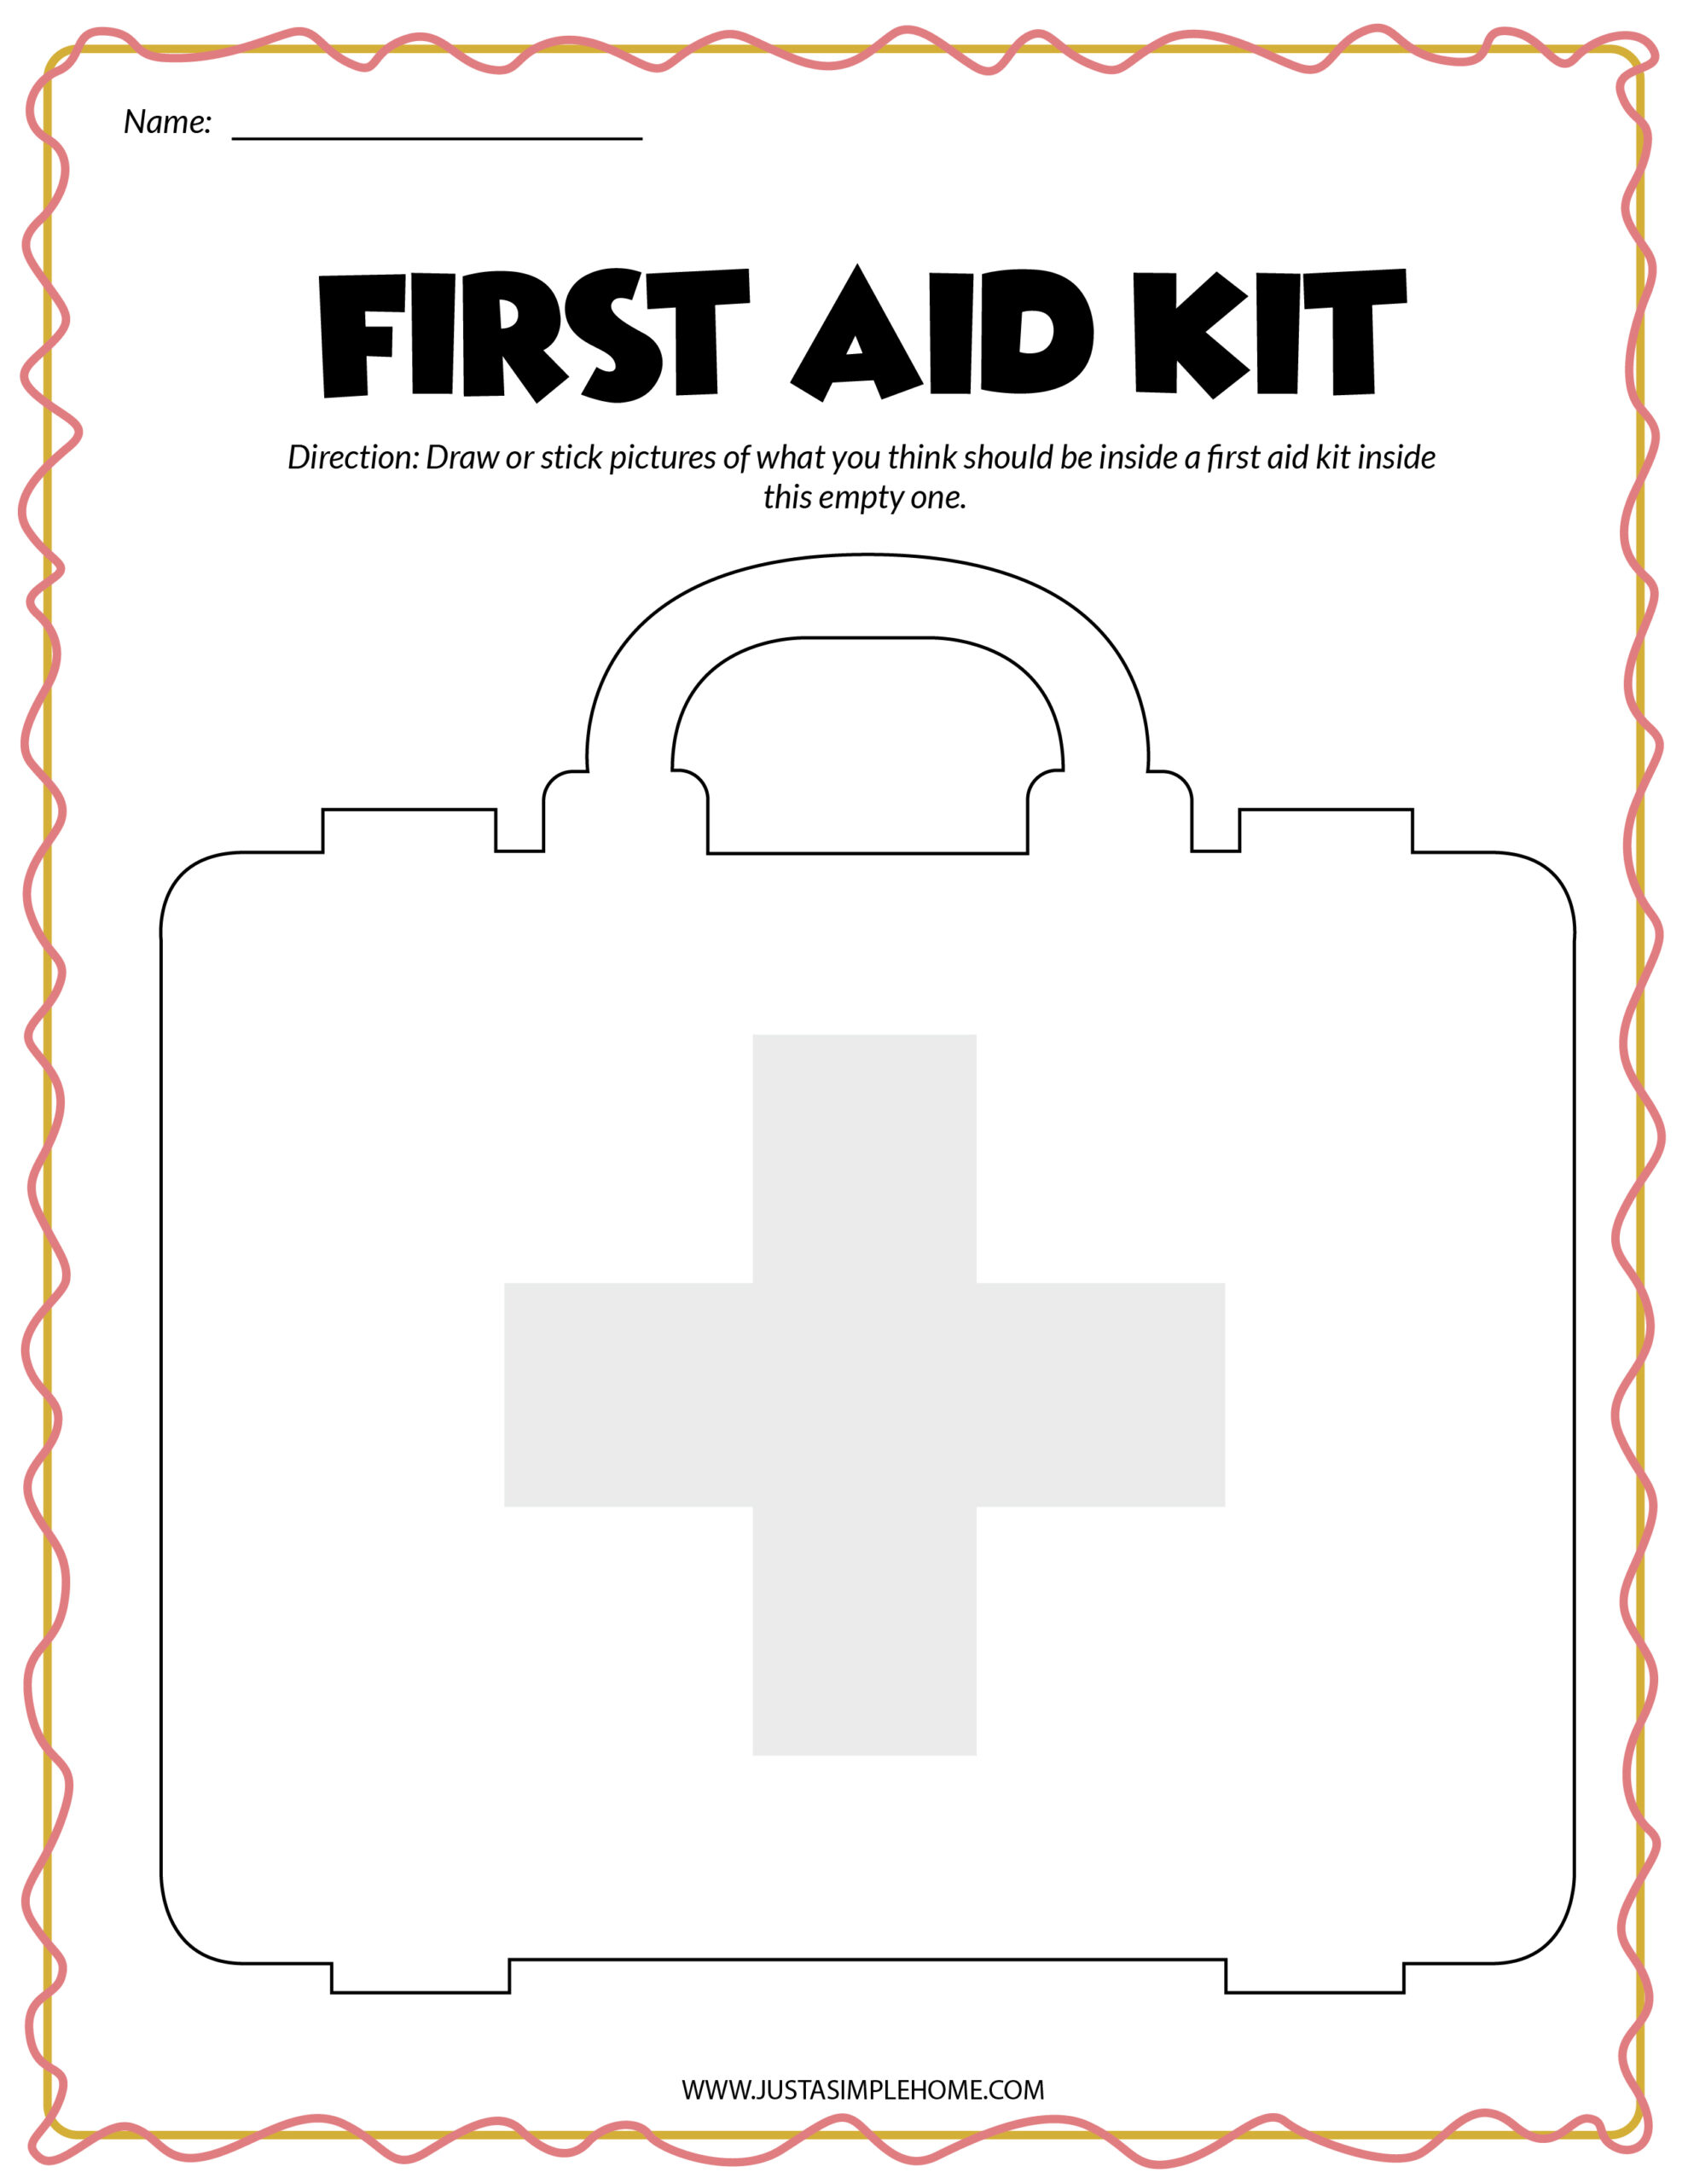 First Aid Learning Activity Pack Free Printables Jenny at dapperhouse